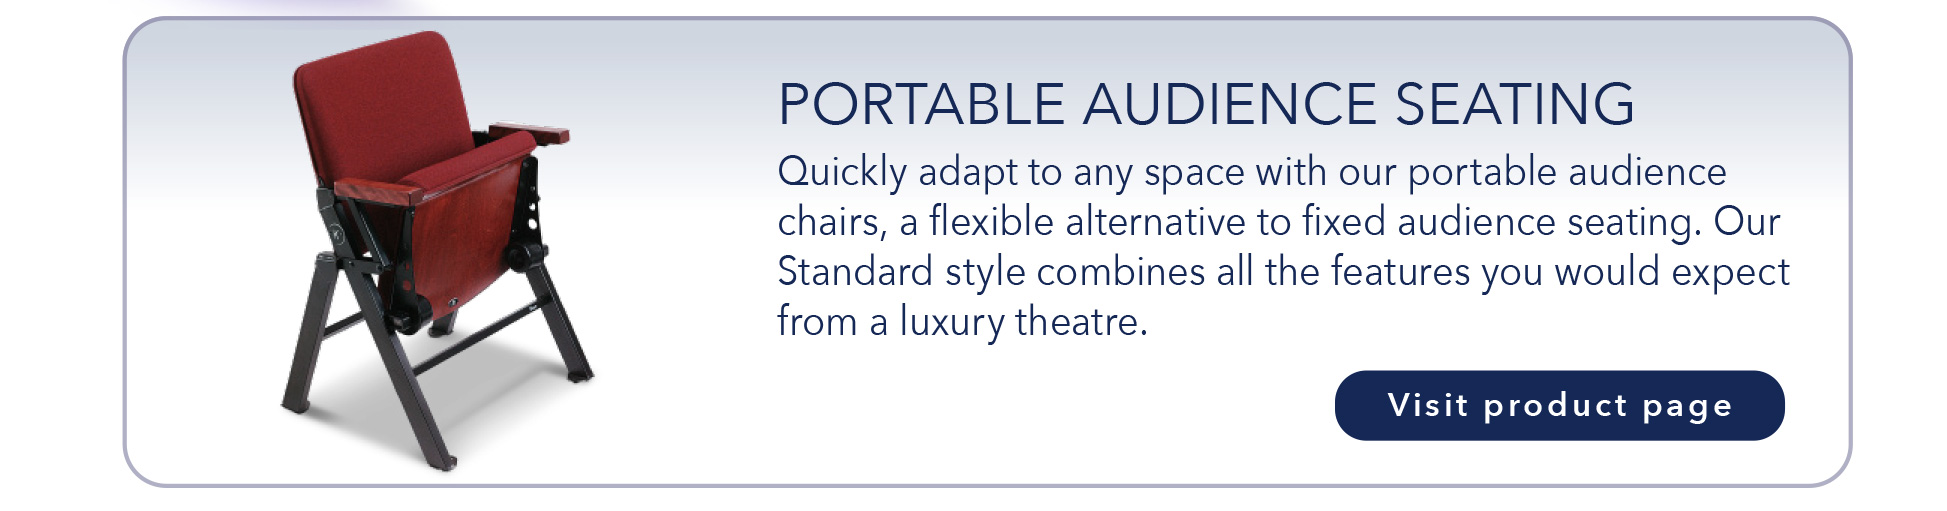 PORTABLE AUDIENCE SEATING
Quickly adapt to any space with our portable audience
chairs, a flexible alternative to fixed audience seating. Our
Standard style combines all the features you would expect
from a luxury theatre.